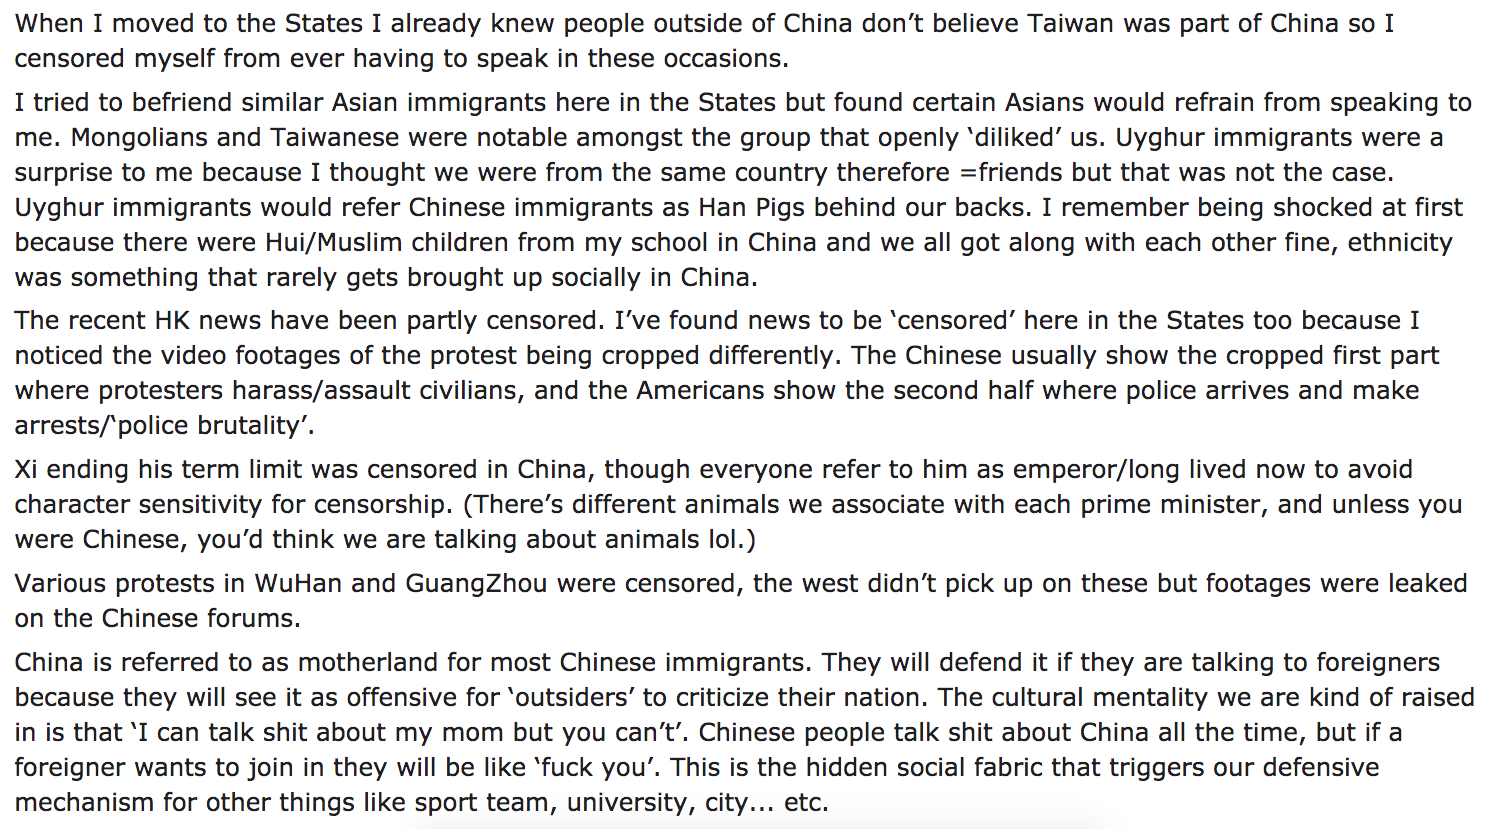 When I moved to the States I already knew people outside of China don't believe Taiwan was part of China so I censored myself from ever having to speak in these occasions. I tried to befriend similar Asian immigrants here in the States but f